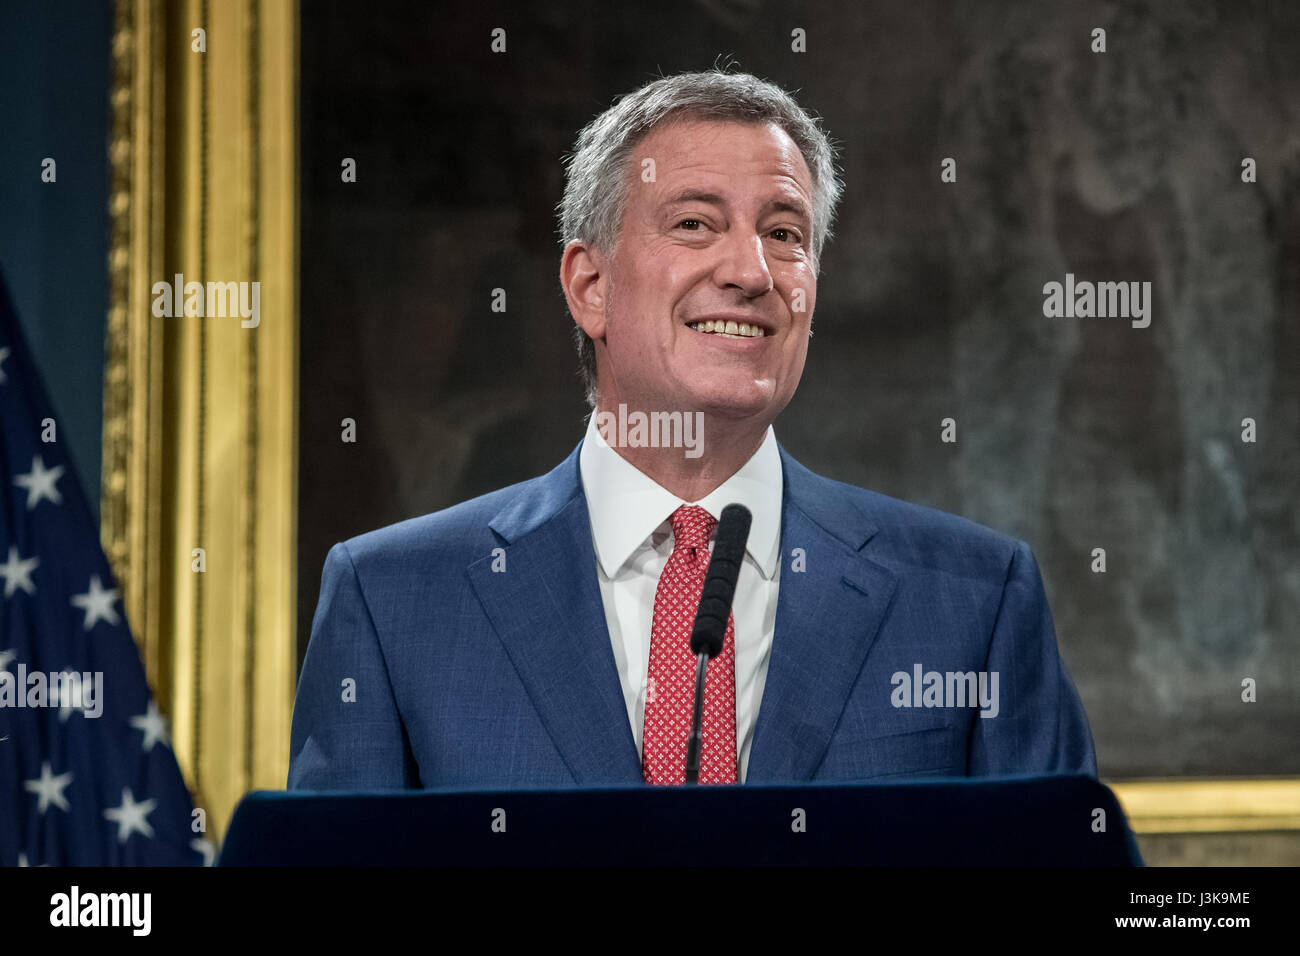 New York, United States. 05th May, 2017. Mayor Bill de Blasio is seen during the press conference. New York City Mayor Bill de Blasio, joined by U.S. Congress members representing districts in New York City, held a press conference in the Blue Room at City Hall to announce a federal budget deal allowing for $68 million of reimbursements by the federal government for the City's expenses in protecting Trump Tower and the Presidential First Family. Credit: Albin Lohr-Jones/Pacific Press/Alamy Live News Stock Photo